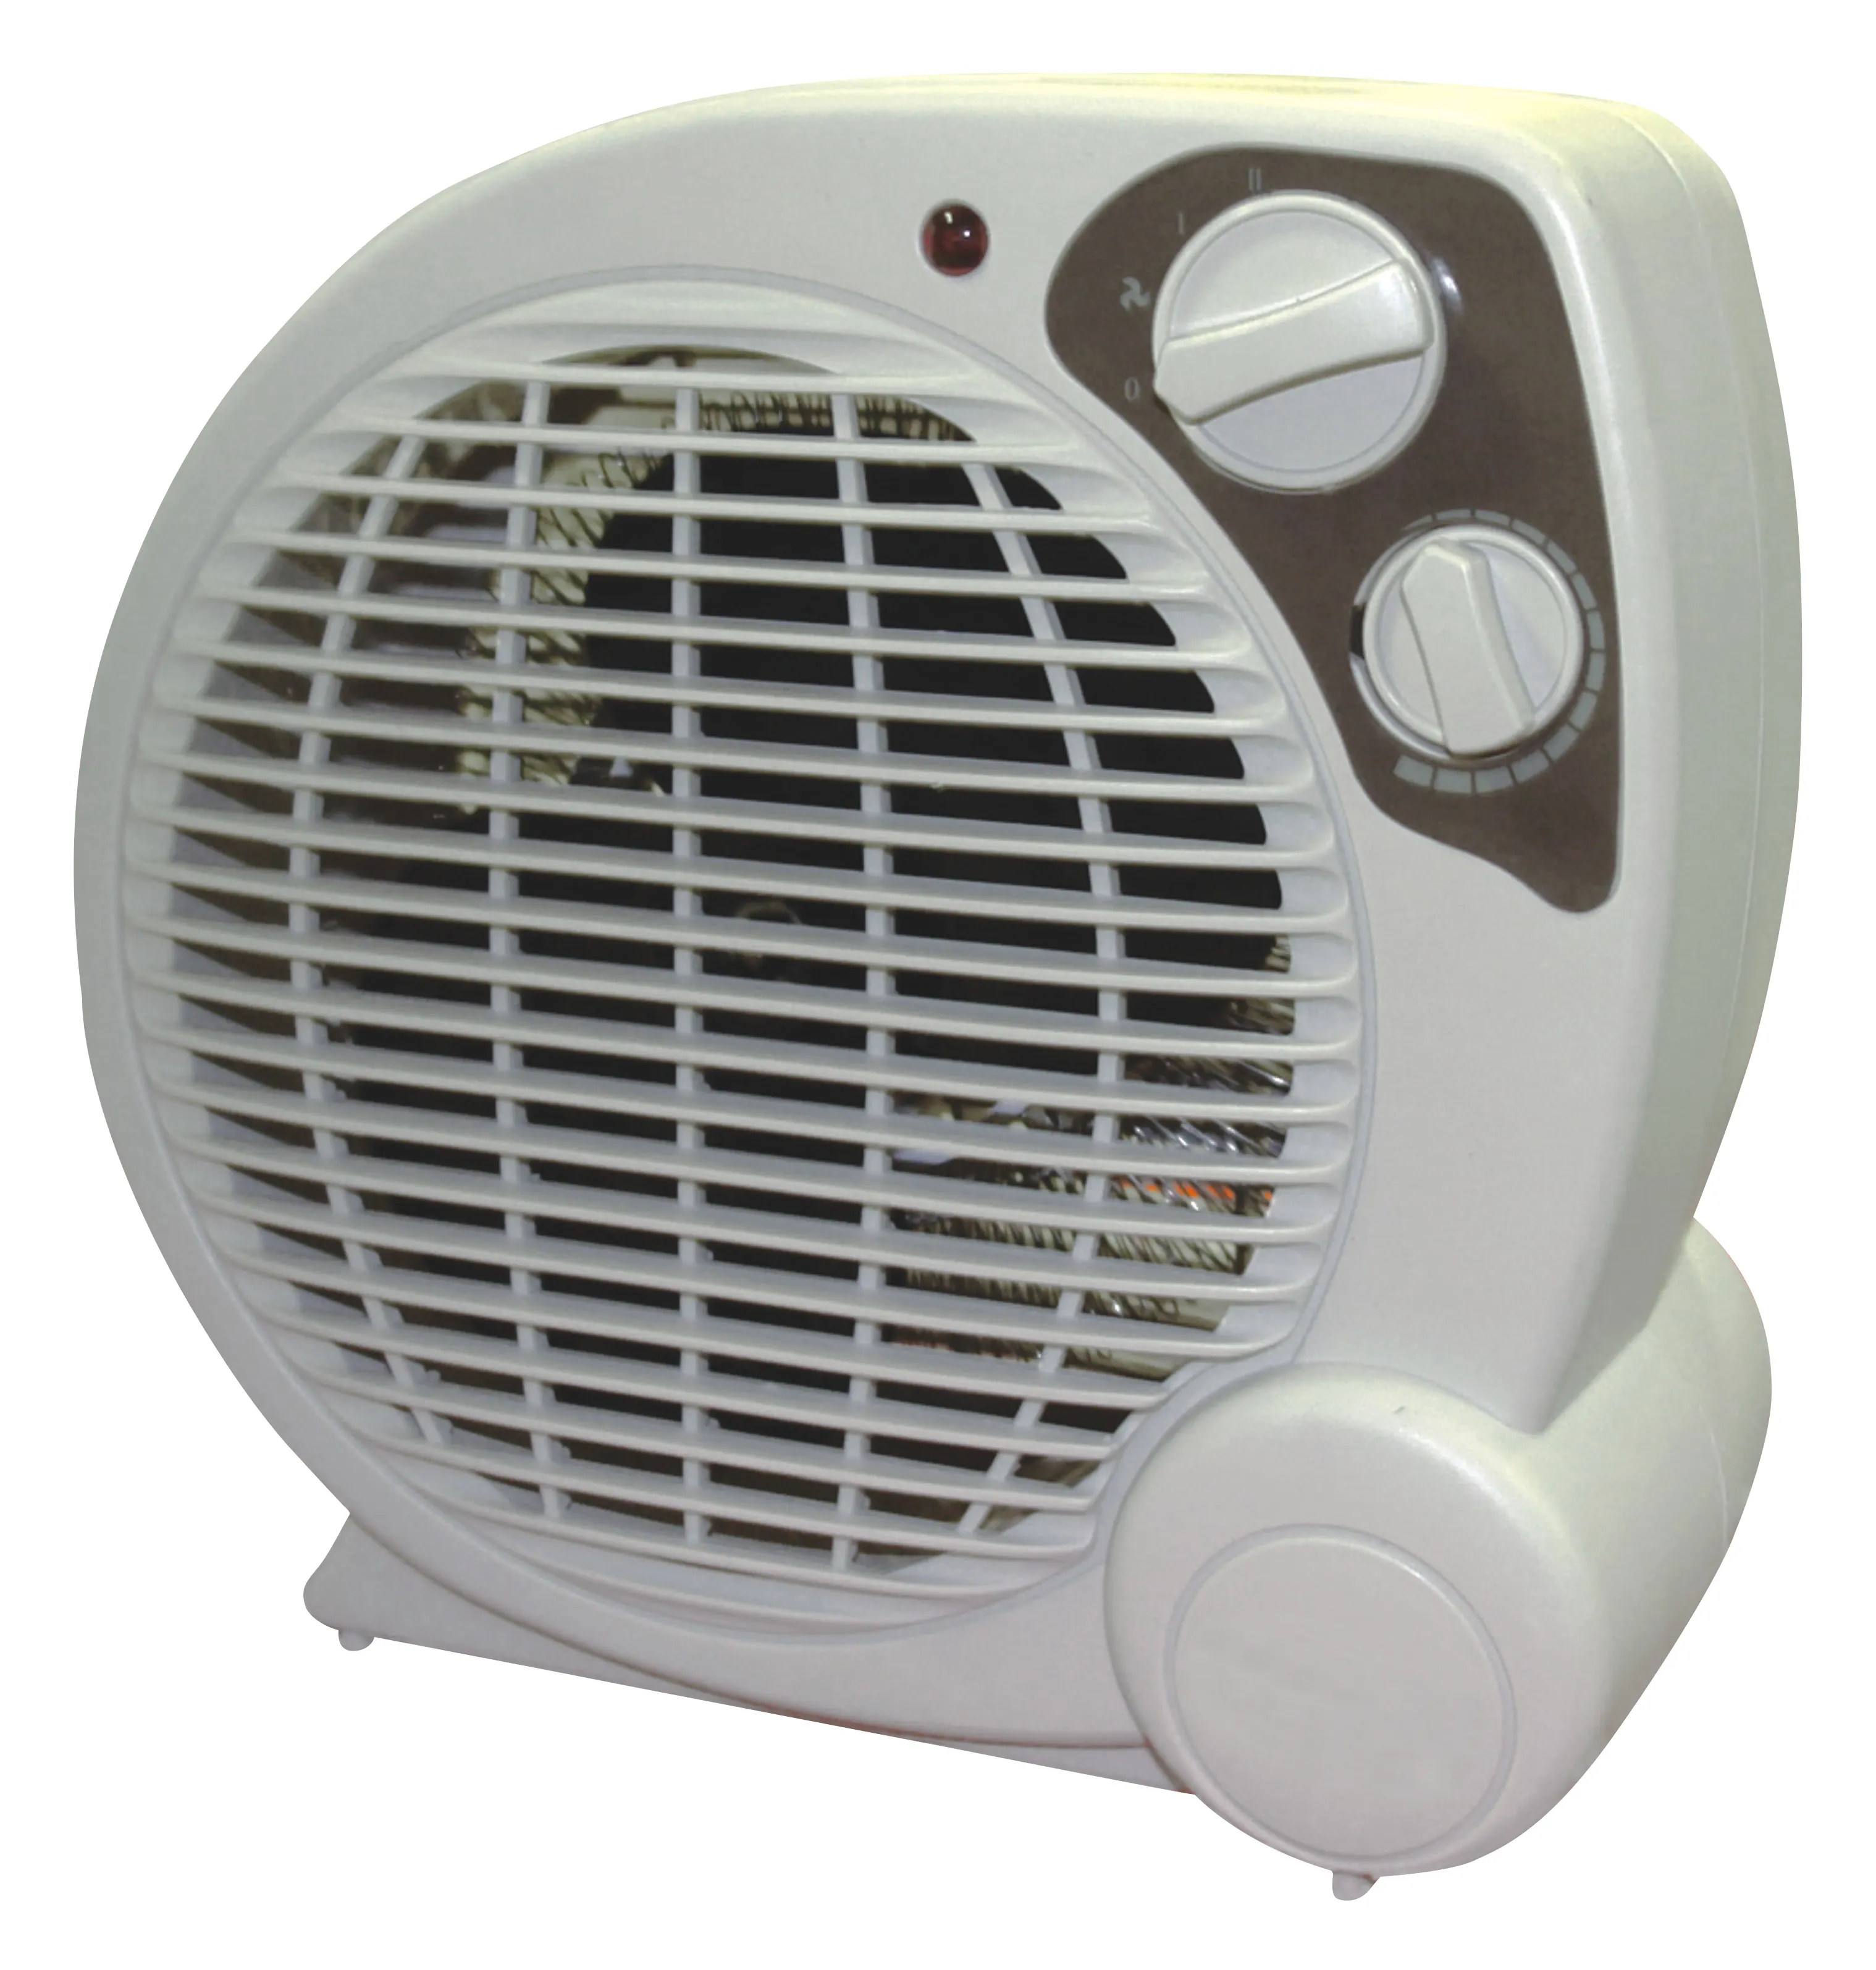 multi-function desktop mini portable fan heater with adjustable thermostat control Top selling